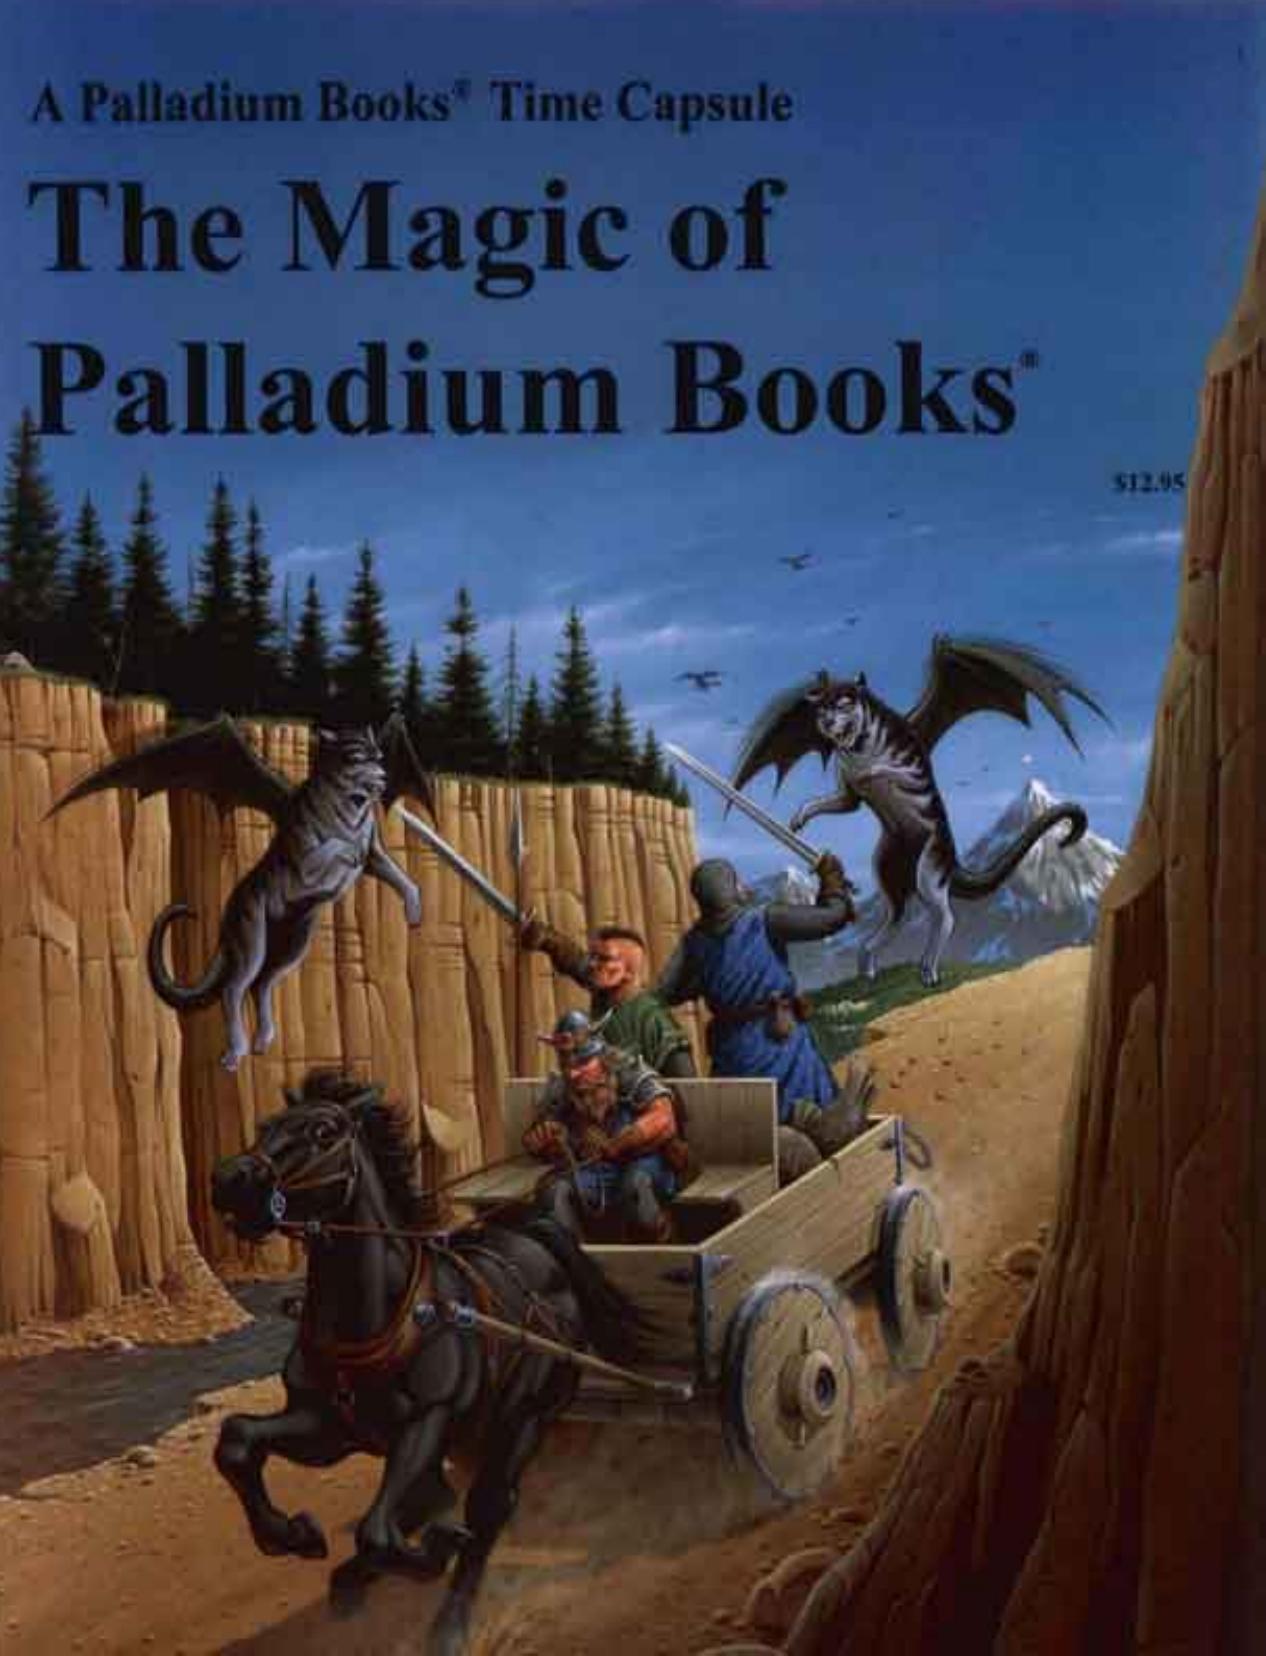 The Collected Magic of Palladium Books by PALmopP